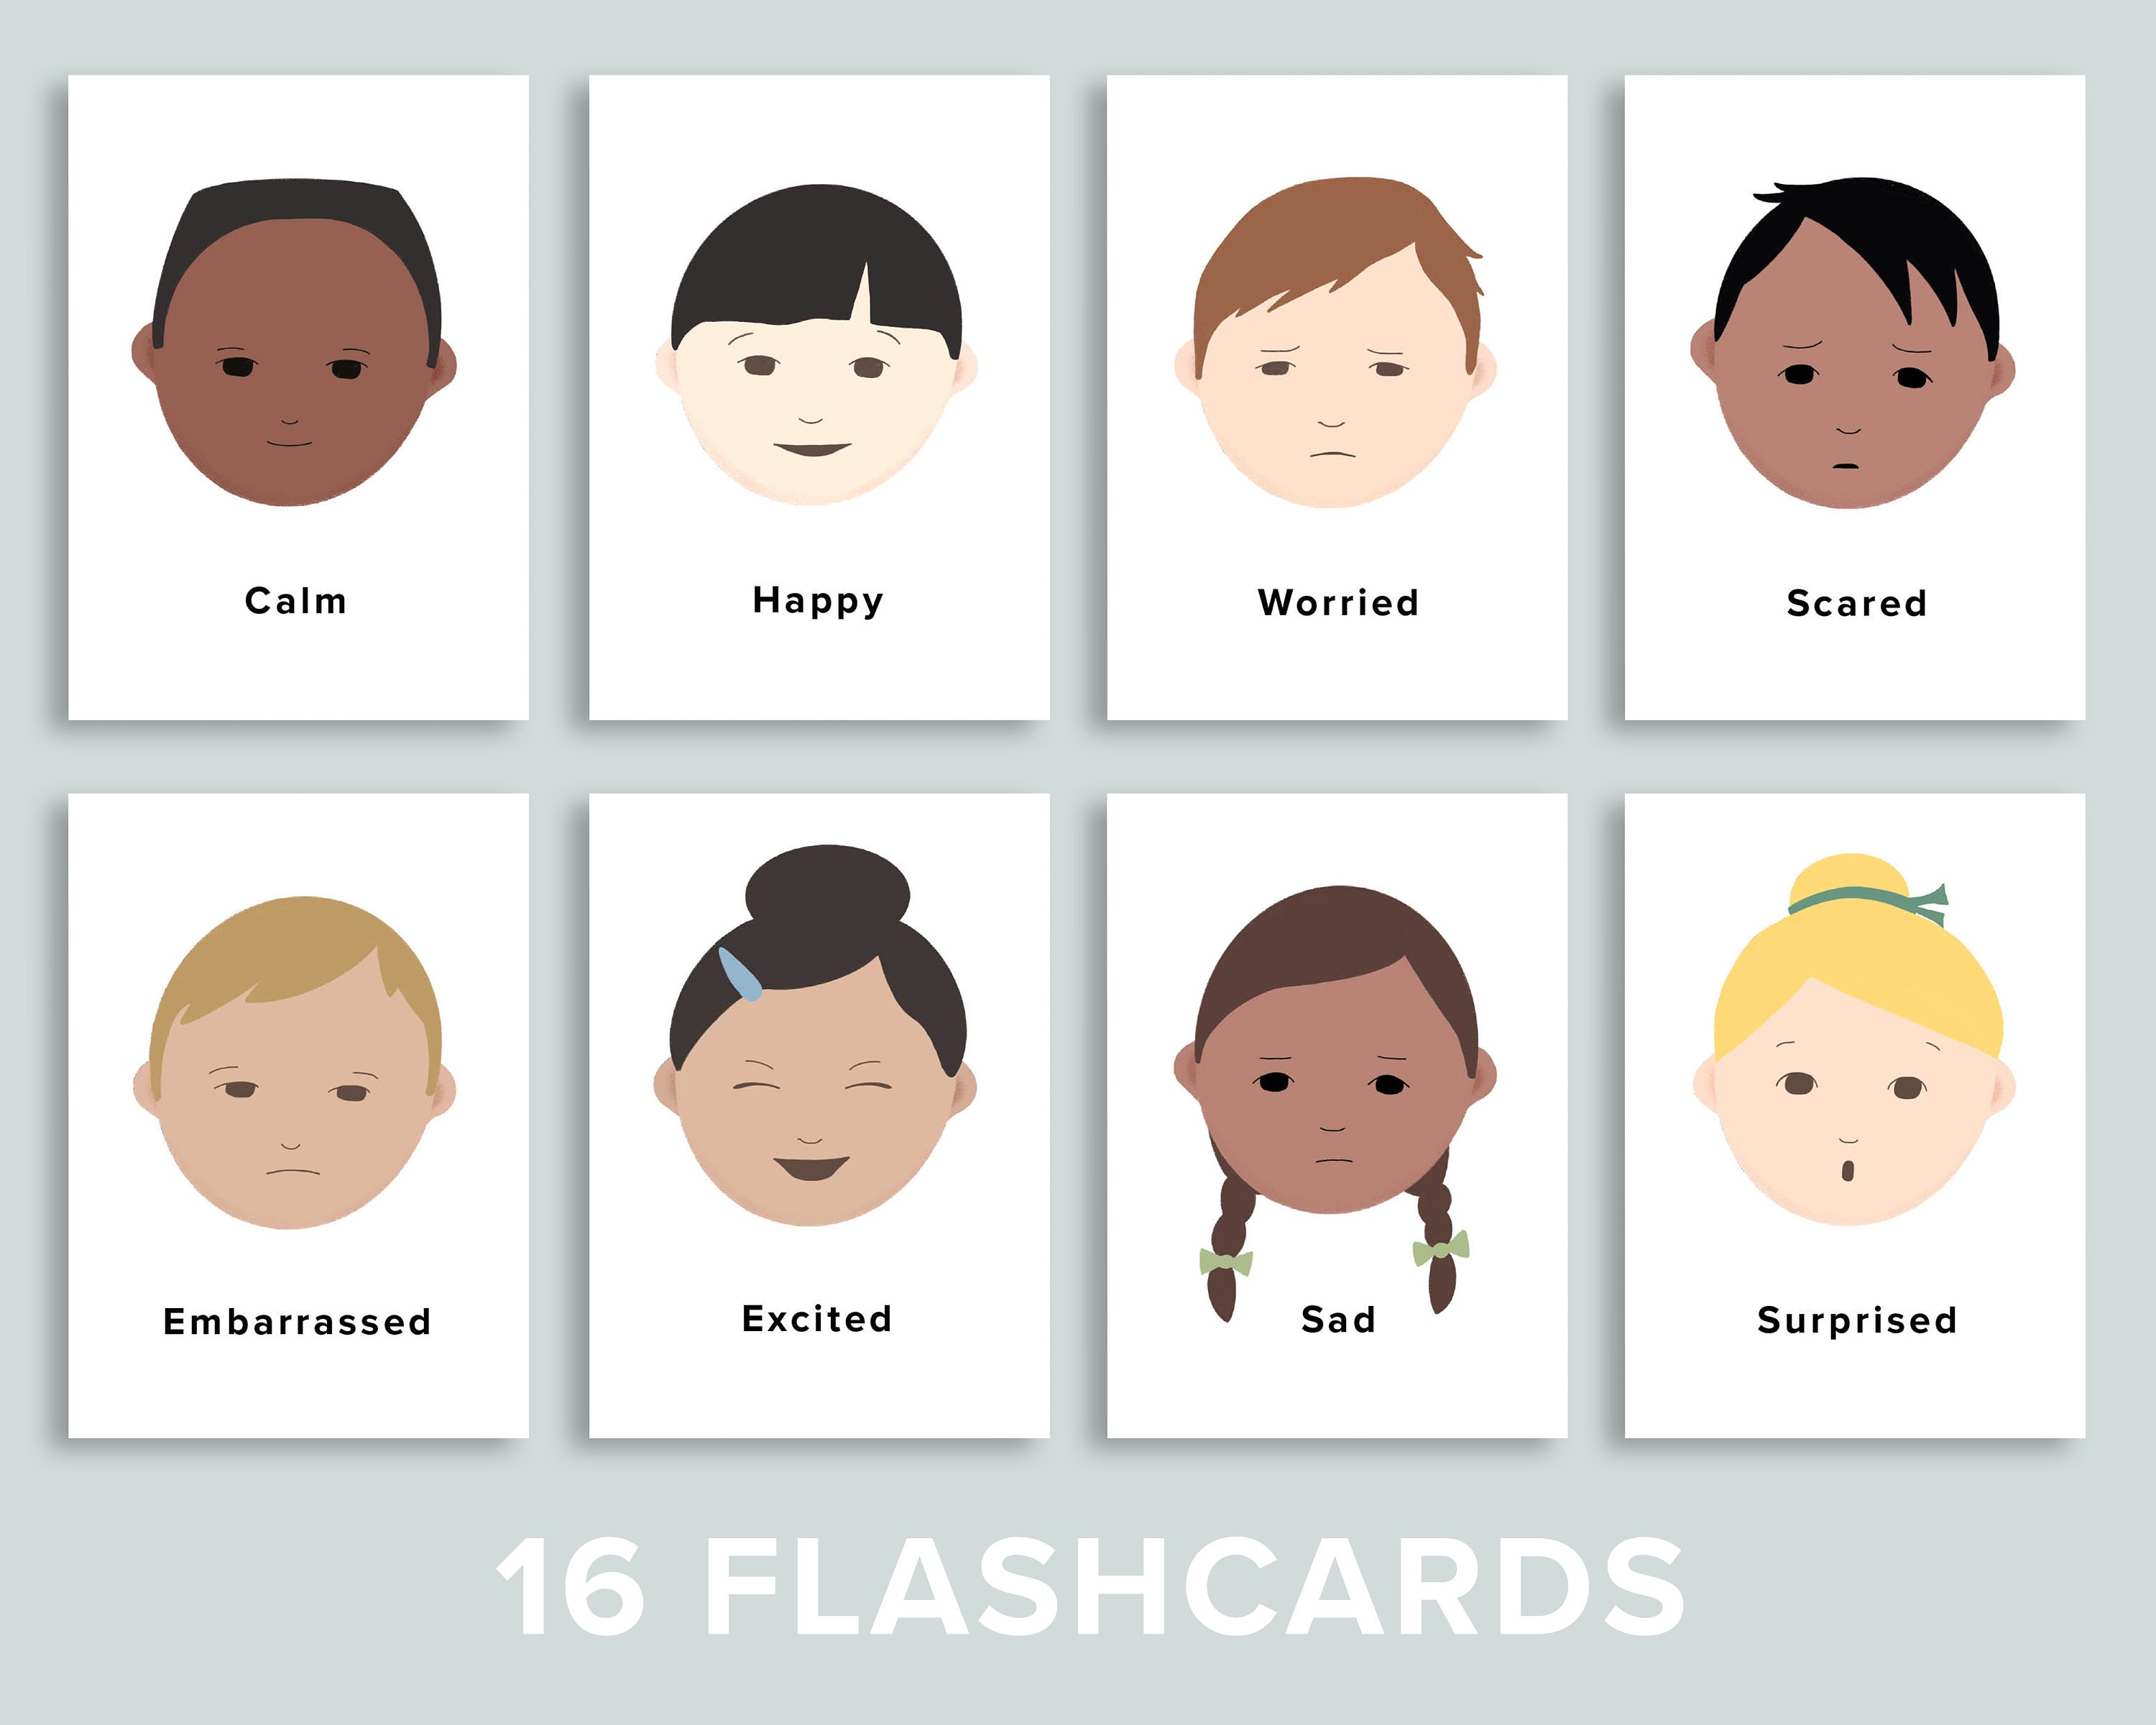 EMOTIONS and Feelings printable flashcards for kids, 28 Emotions flashcards